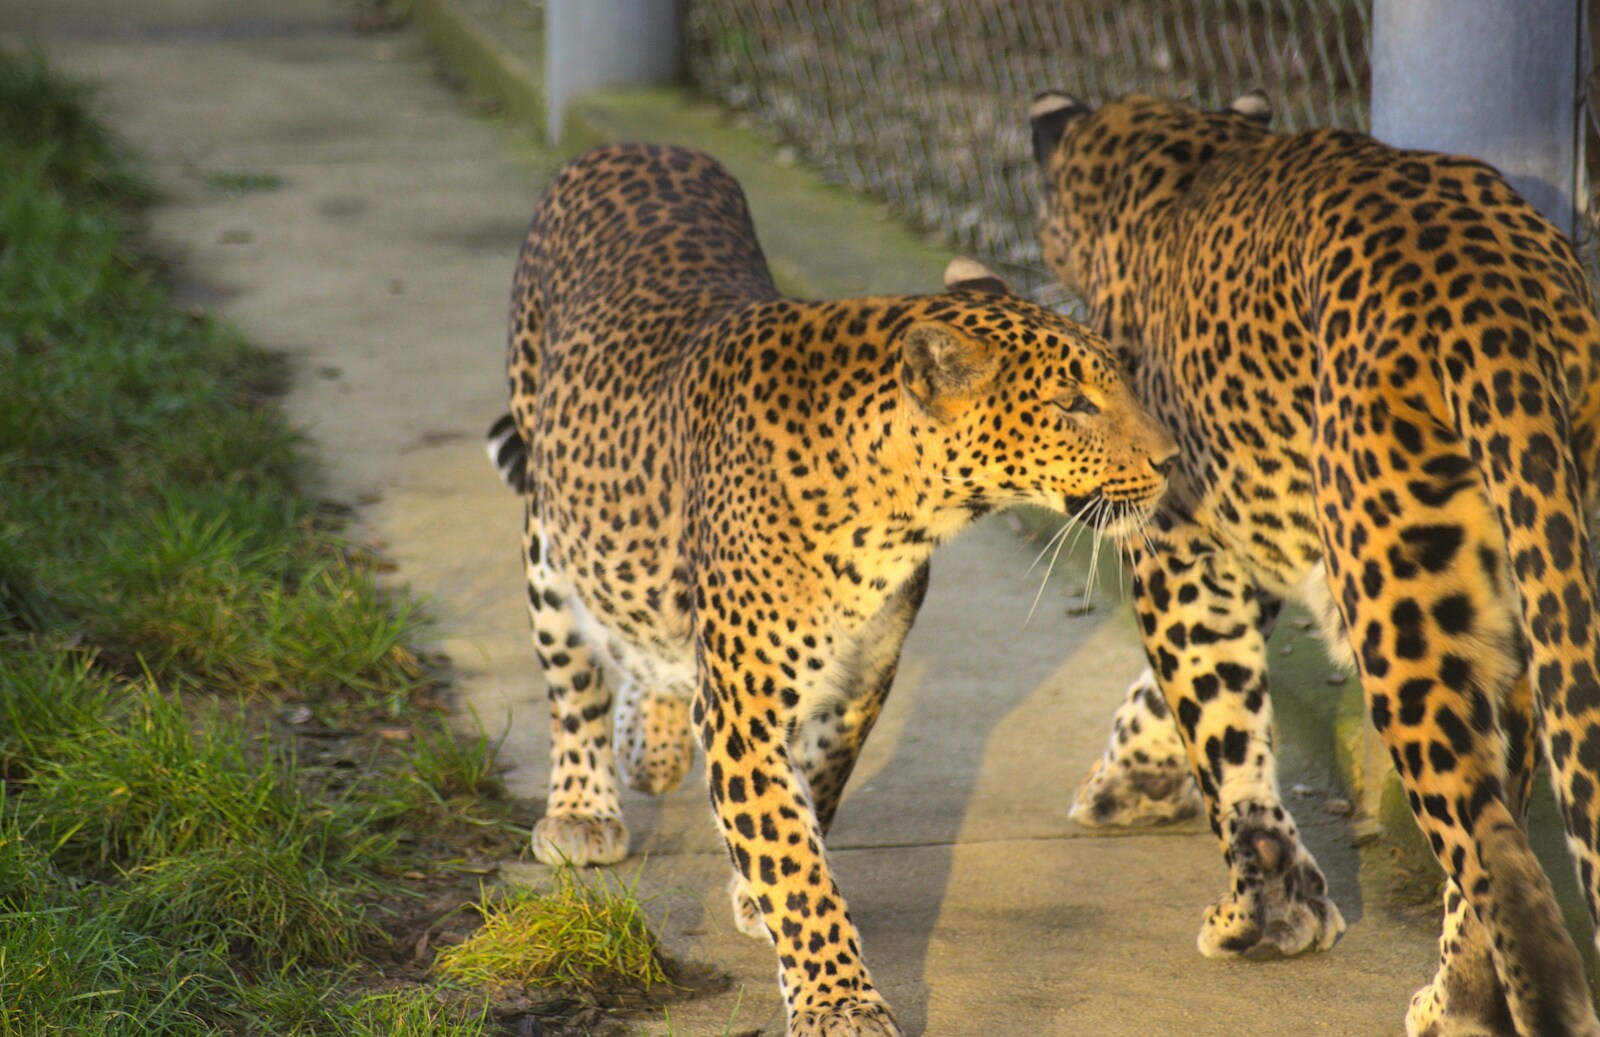 A couple of leopards from Trips to Banham Zoo and Norwich, Norfolk - 2nd January 2012